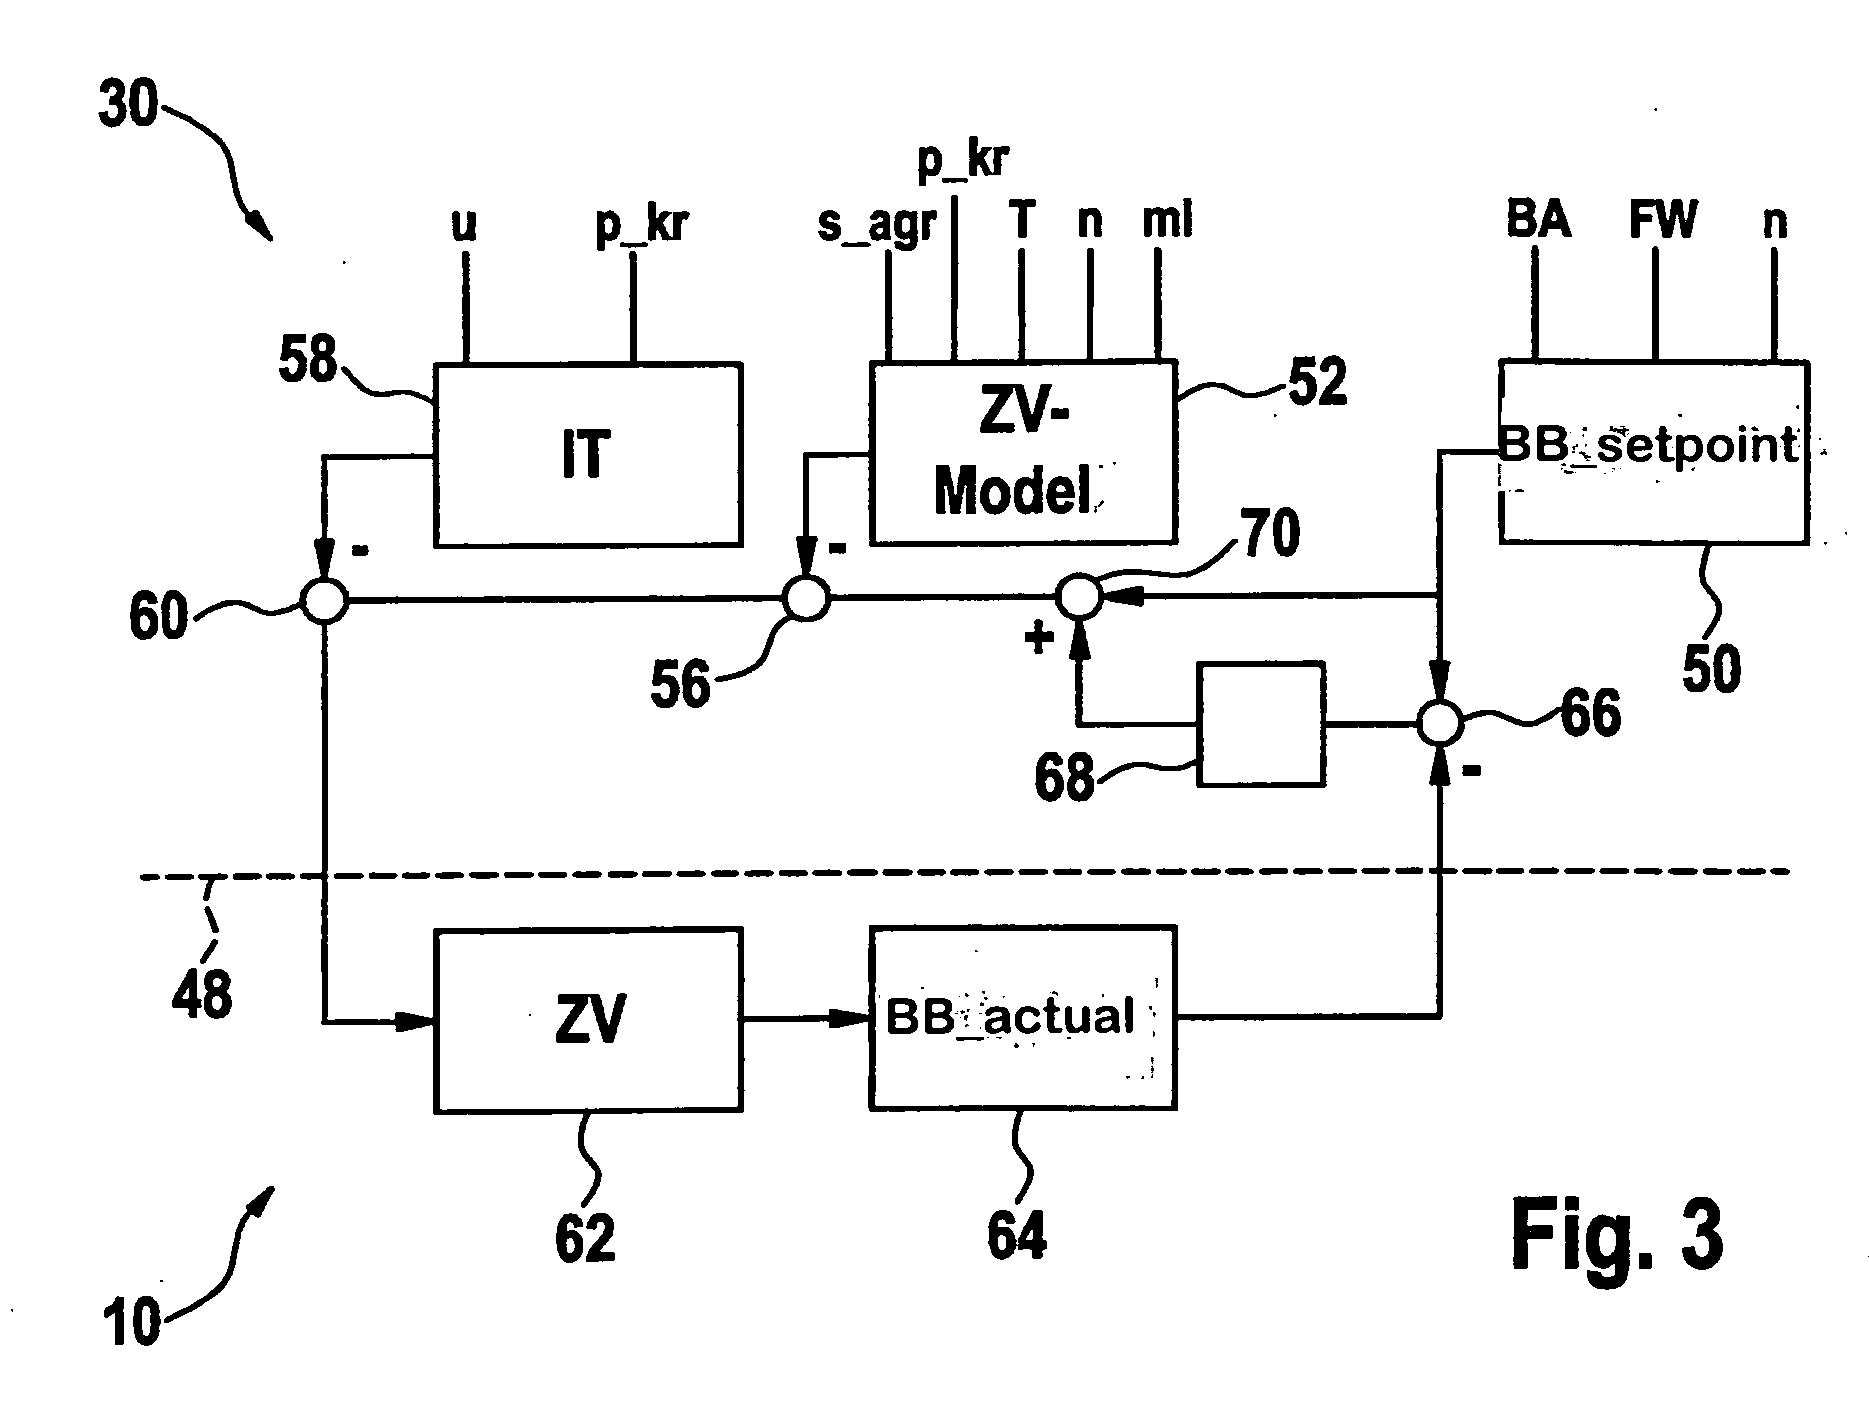 Method for controlling a fuel injector of a diesel engine